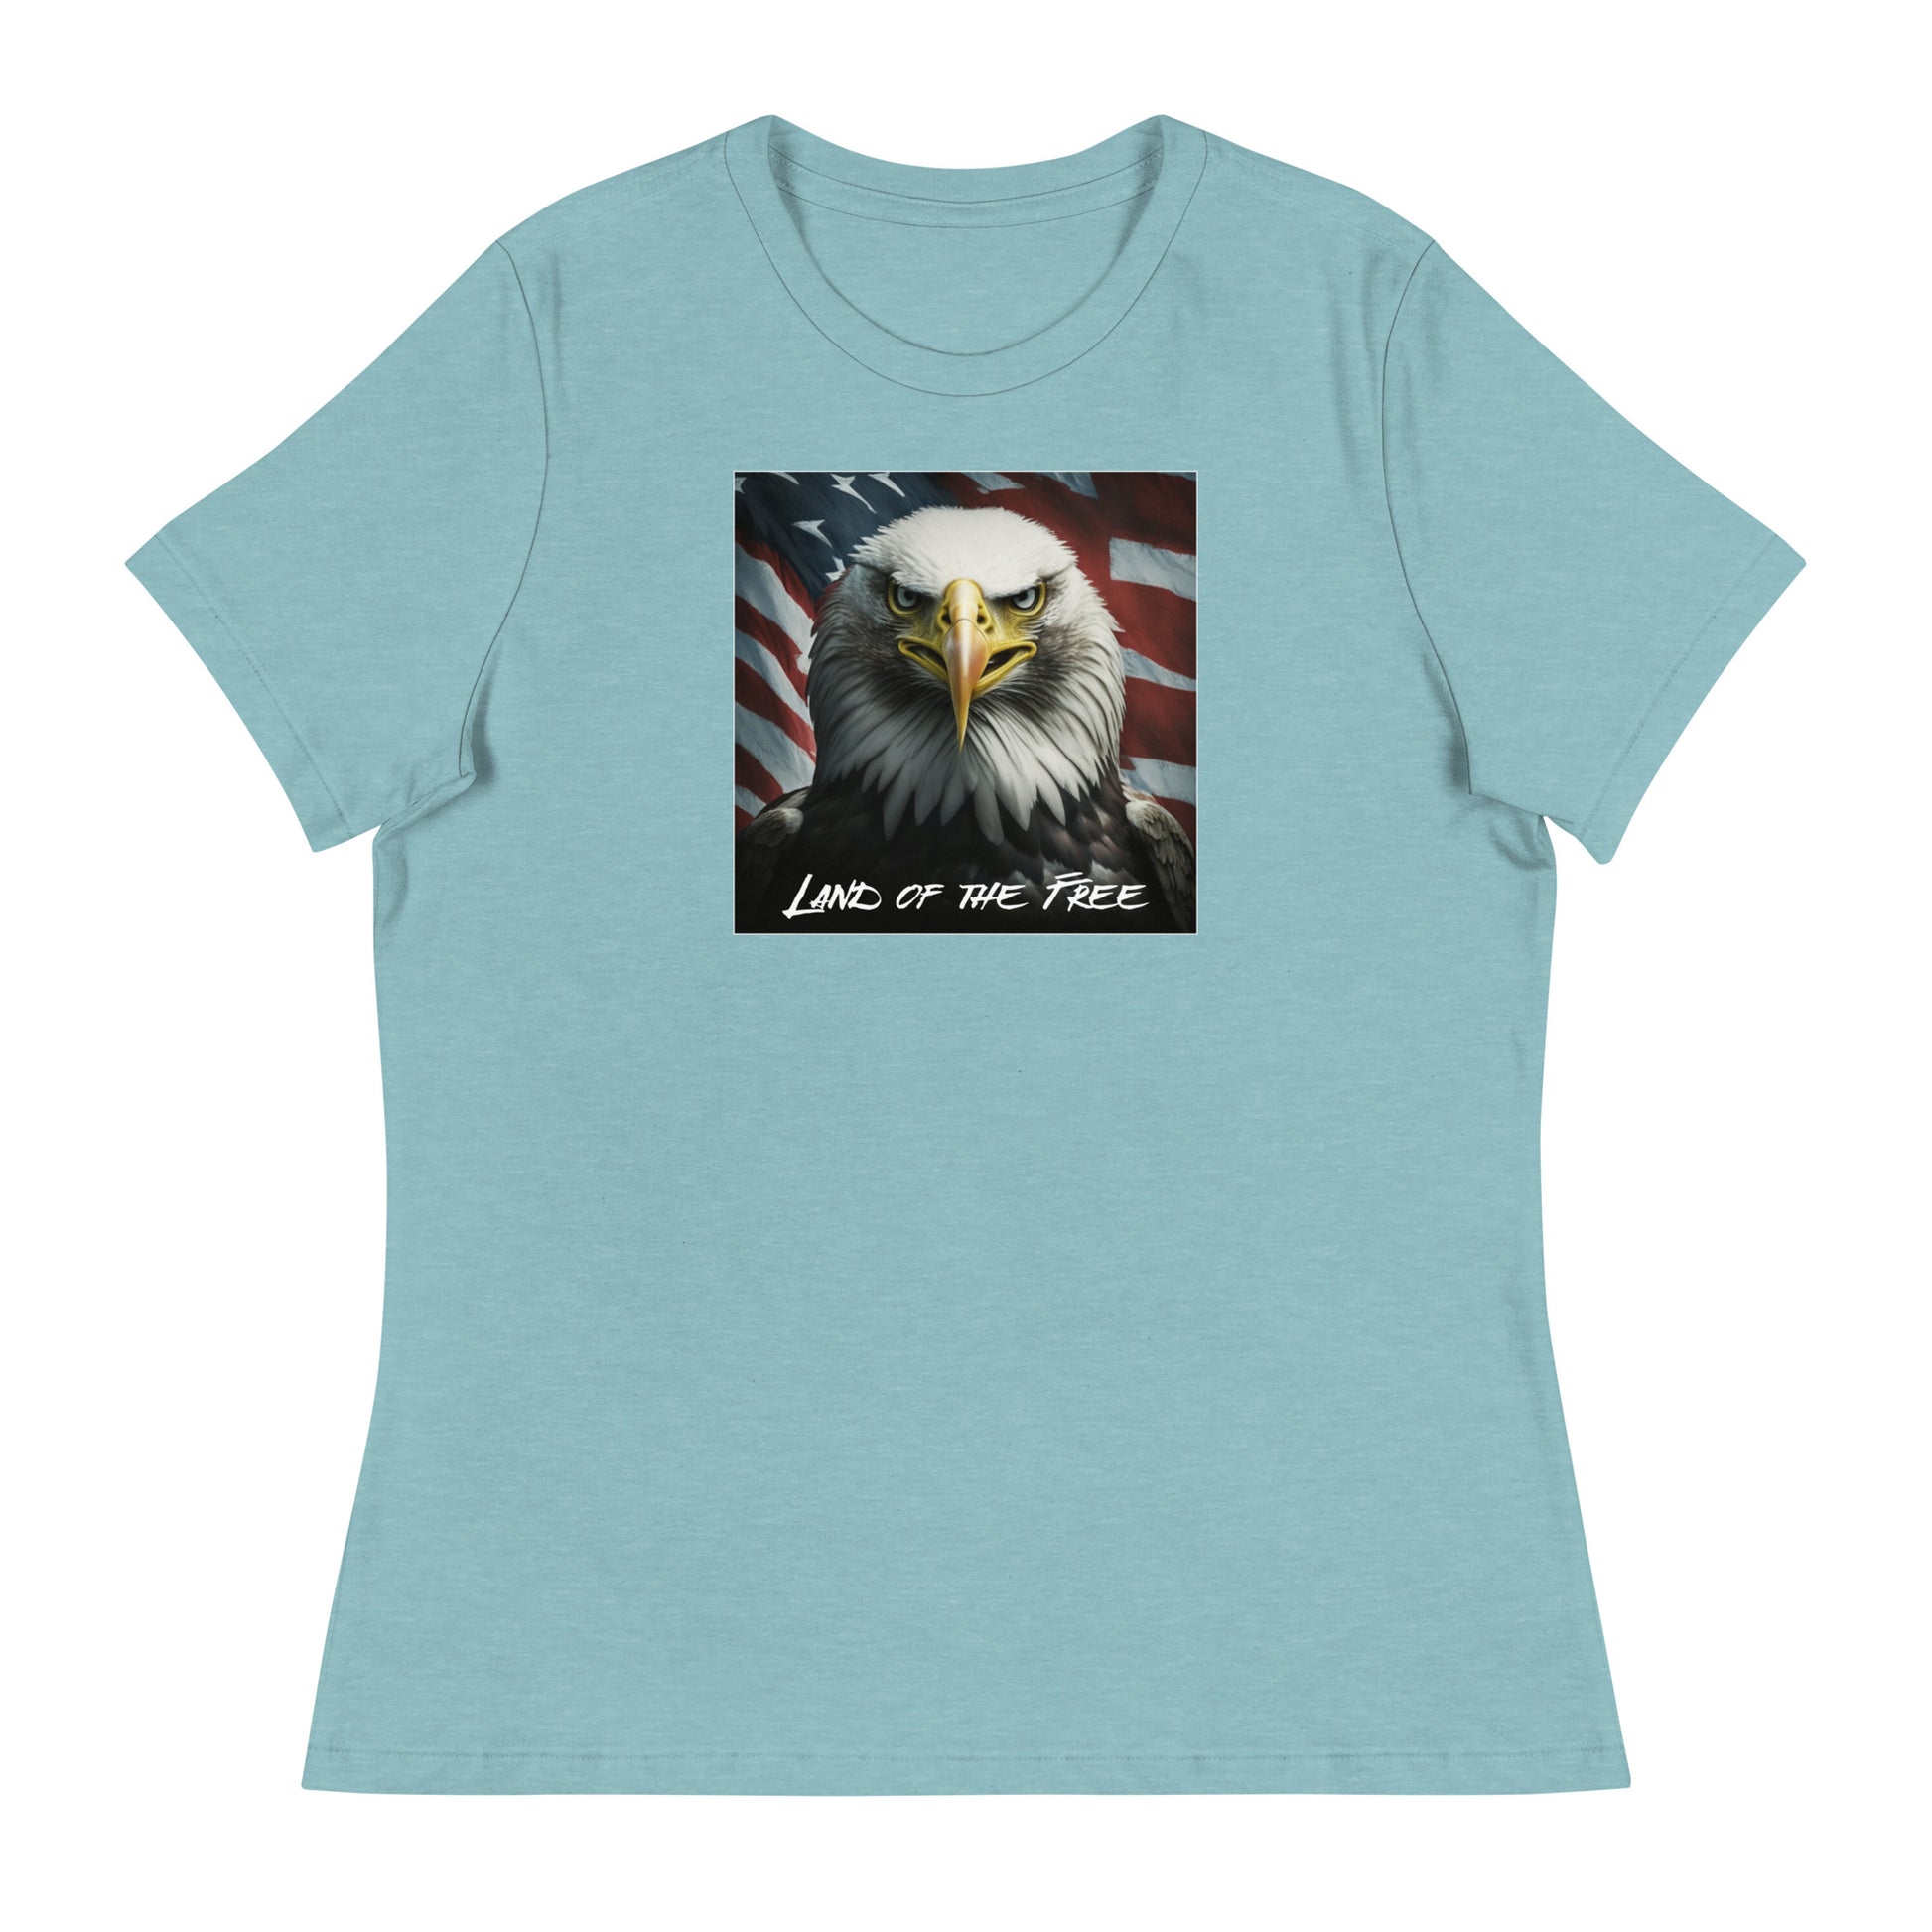 Land of the Free Graphic Women's T-Shirt Heather Blue Lagoon